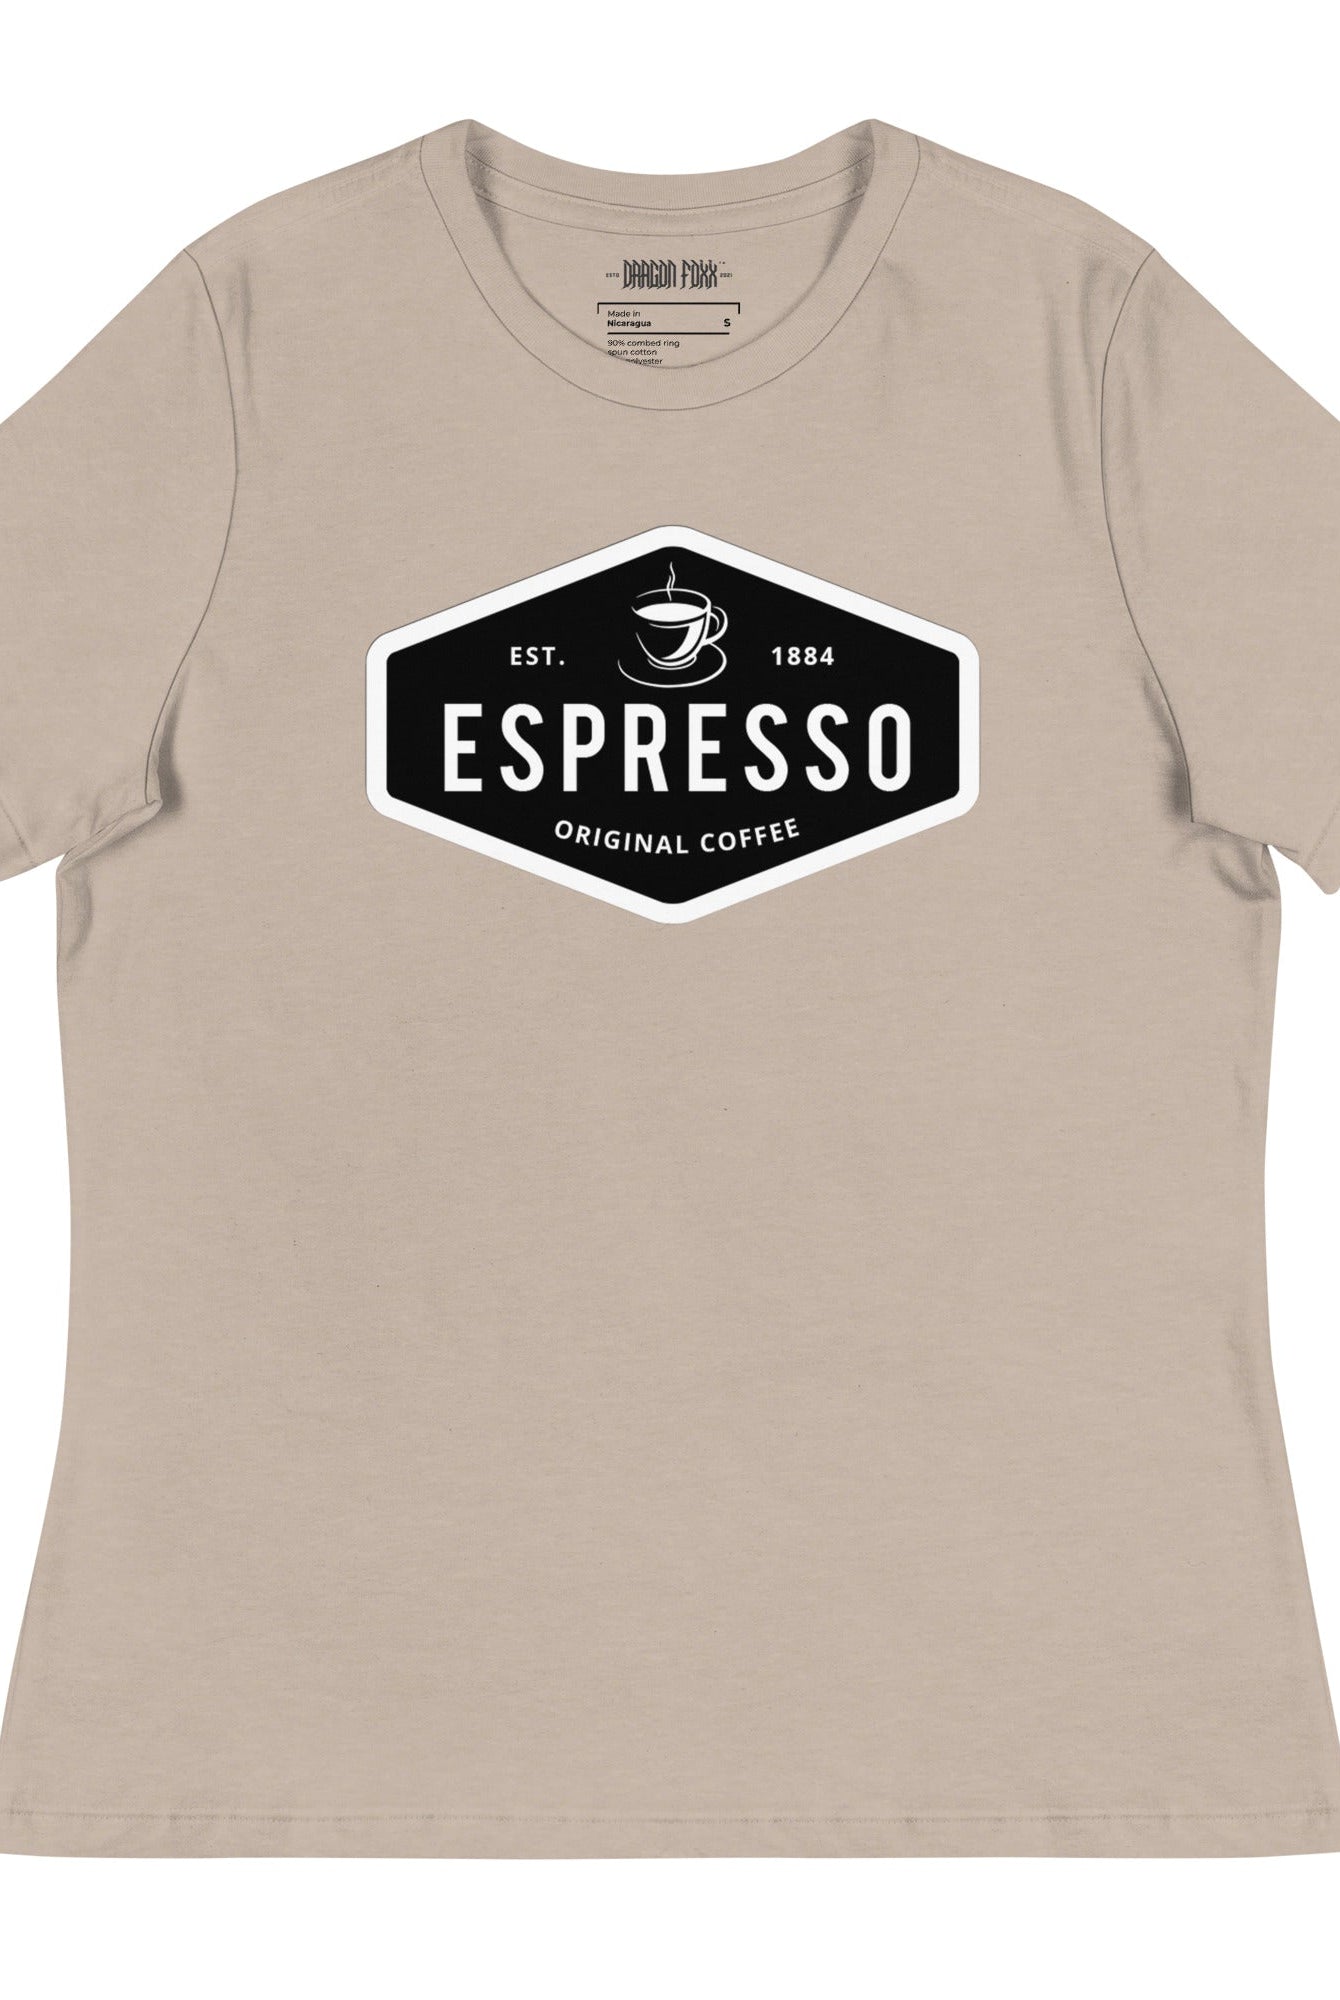 ESPRESSO - Women's Relaxed Fit Graphic T-Shirt in 16 Colors - Women's Relaxed Fit Graphic T-Shirt - DRAGON FOXX™ - 7218598_14273 - Heather Stone - S - Athletic Heather T-shirt - Berry T-shirt - Black T-shirt